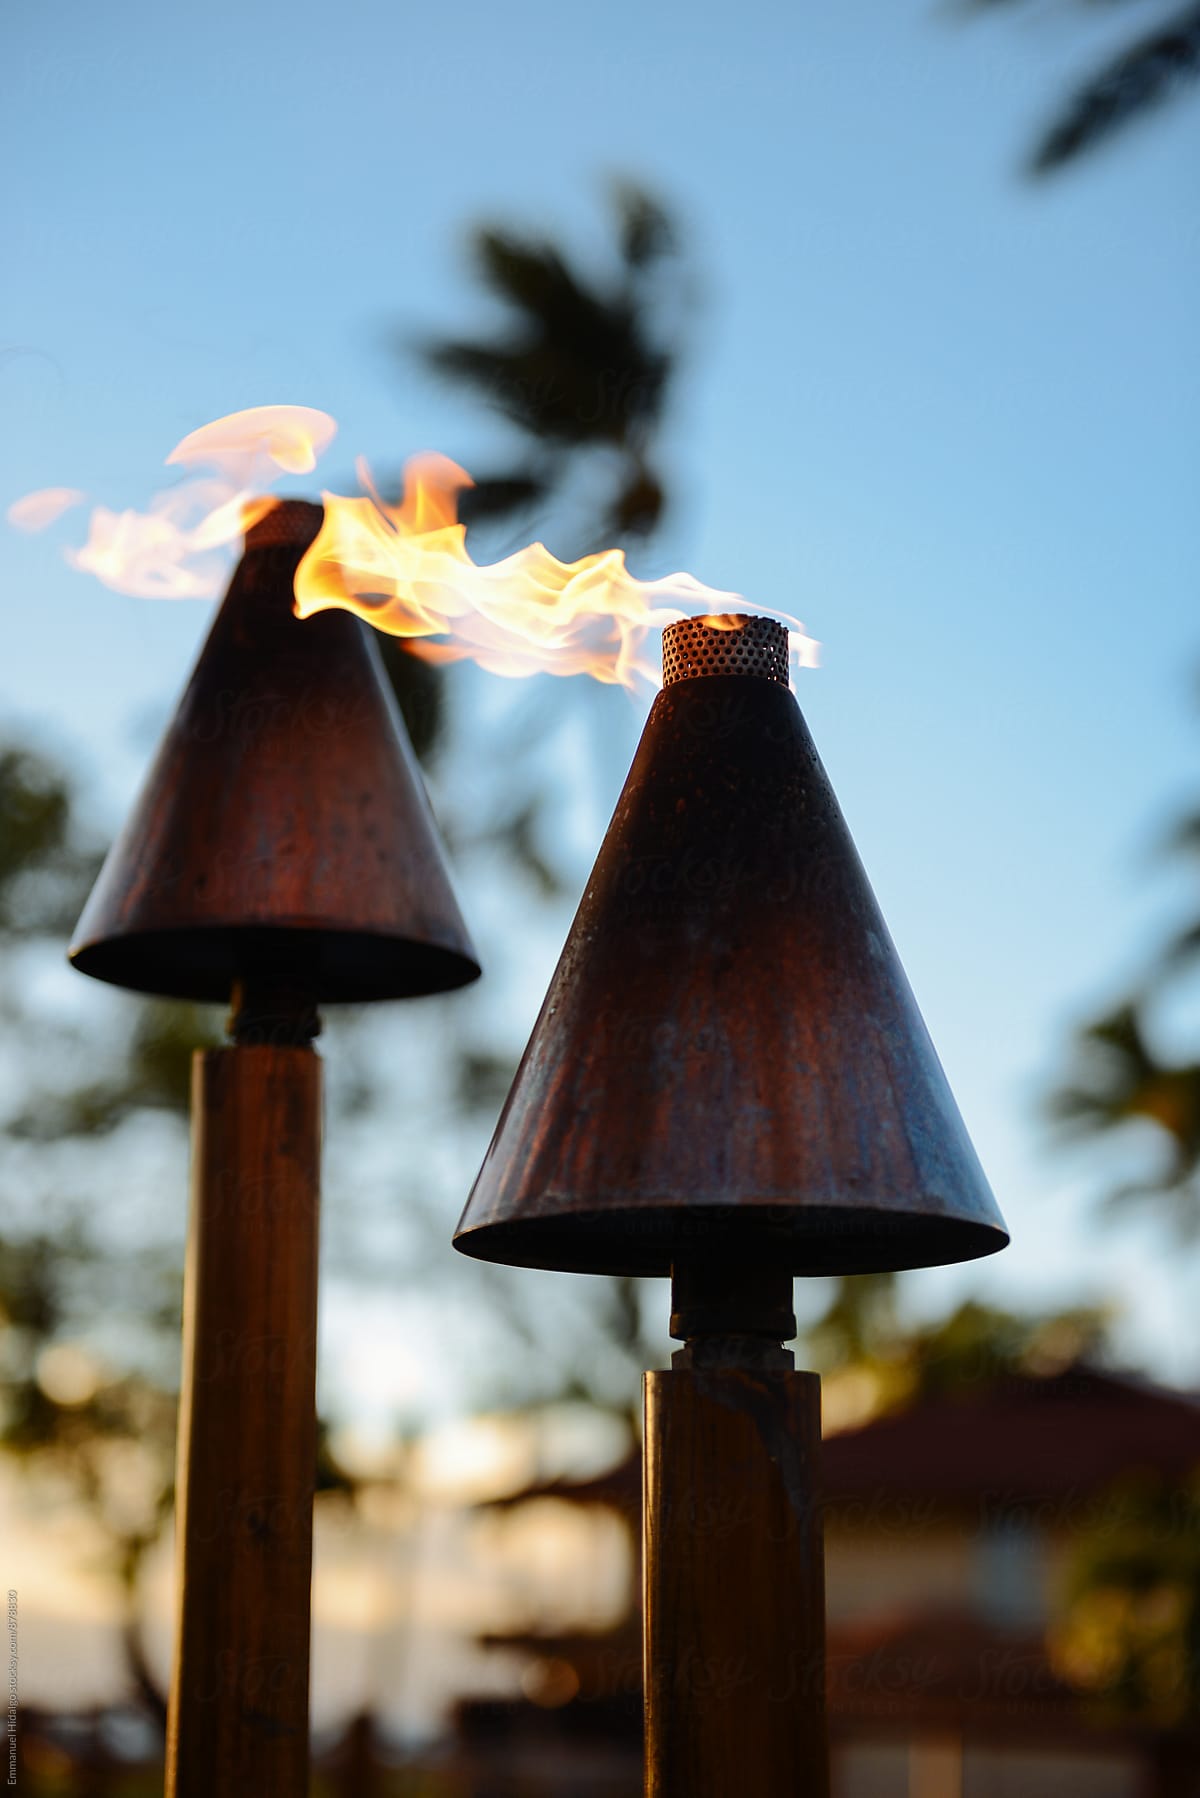 Closeup of two tiki torches lit on the island of Maui